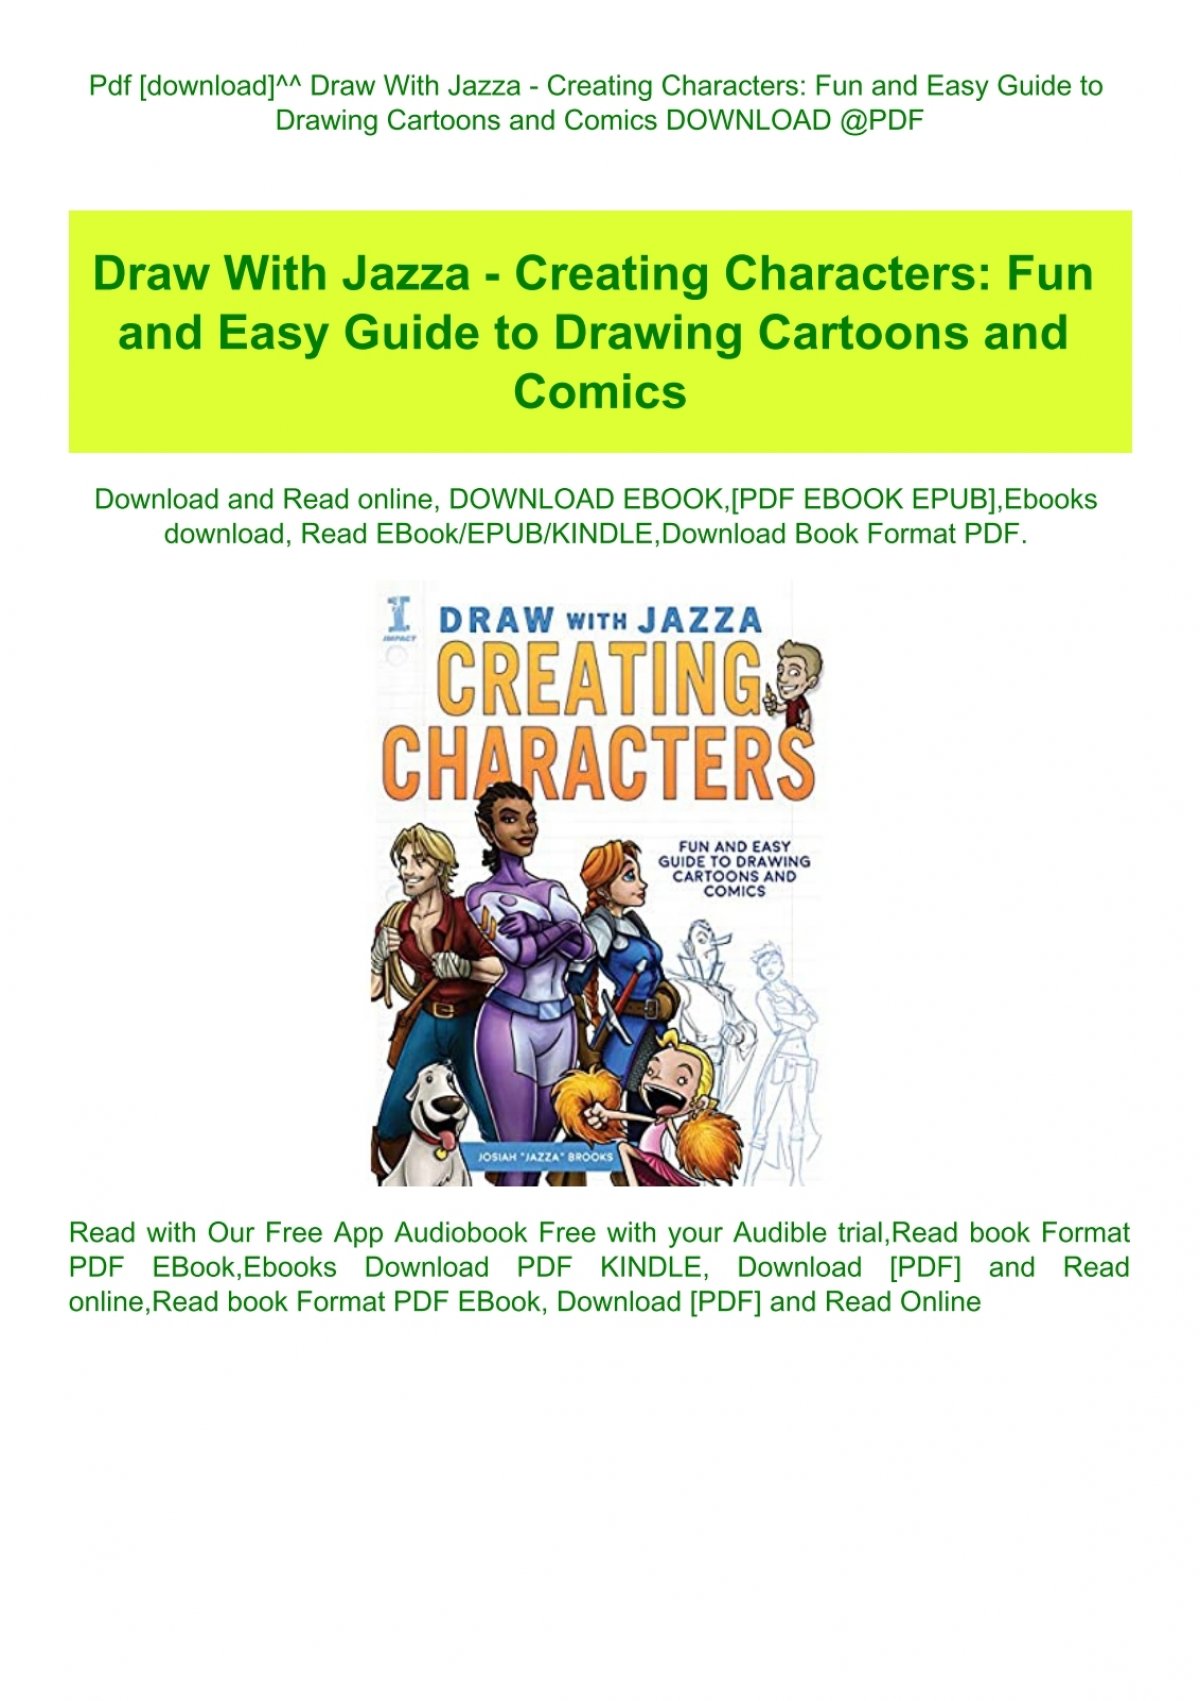 Download Pdf Download Draw With Jazza Creating Characters Fun And Easy Guide To Drawing Cartoons And Comics Download Pdf